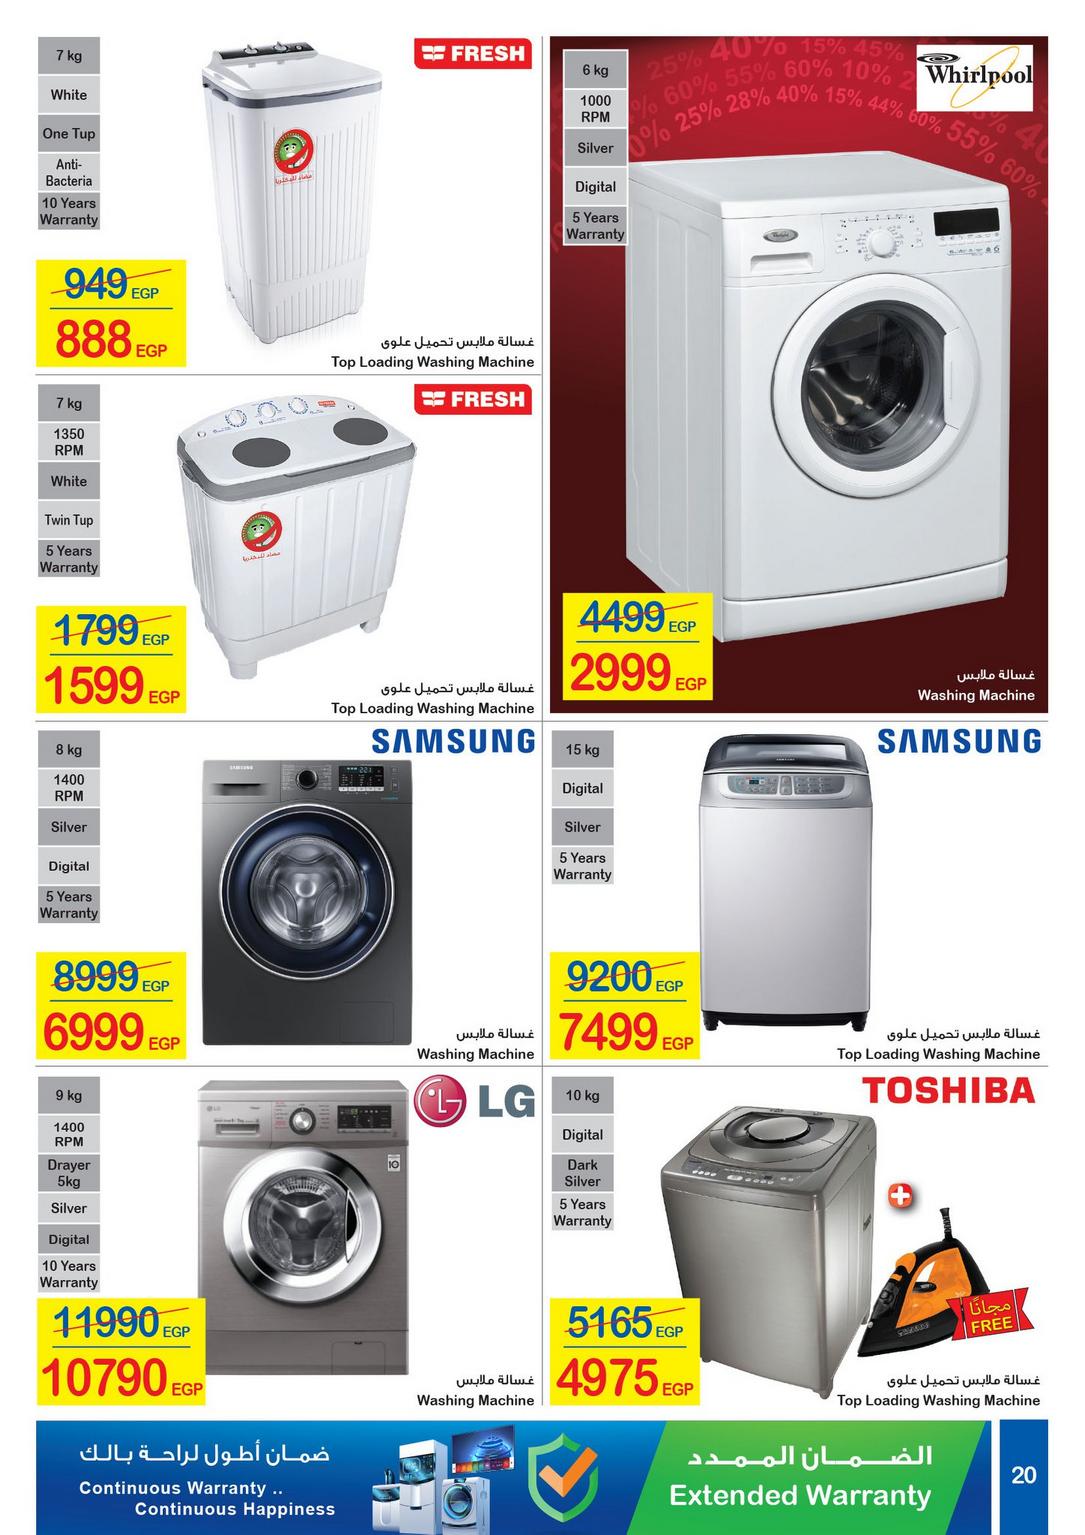 Carrefour Deals from 1/1 till 14/1 | Carrefour Egypt 21